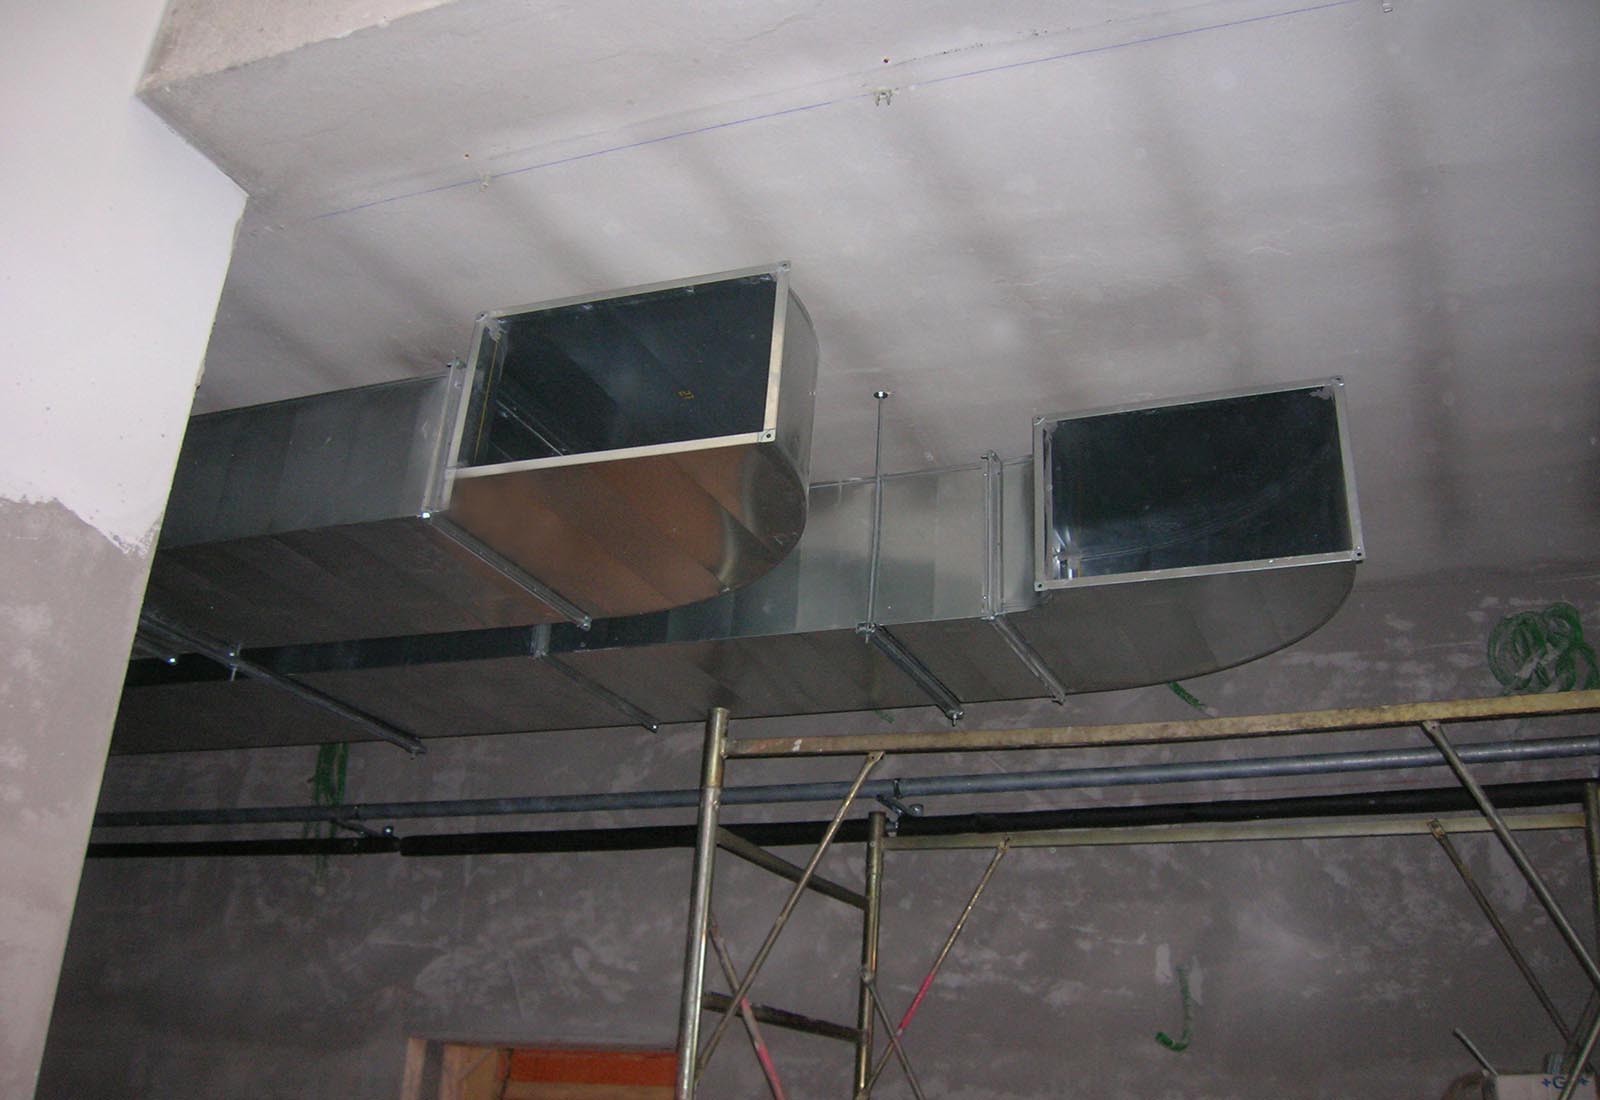 Manzoni school center in Milan - Air conditioning system